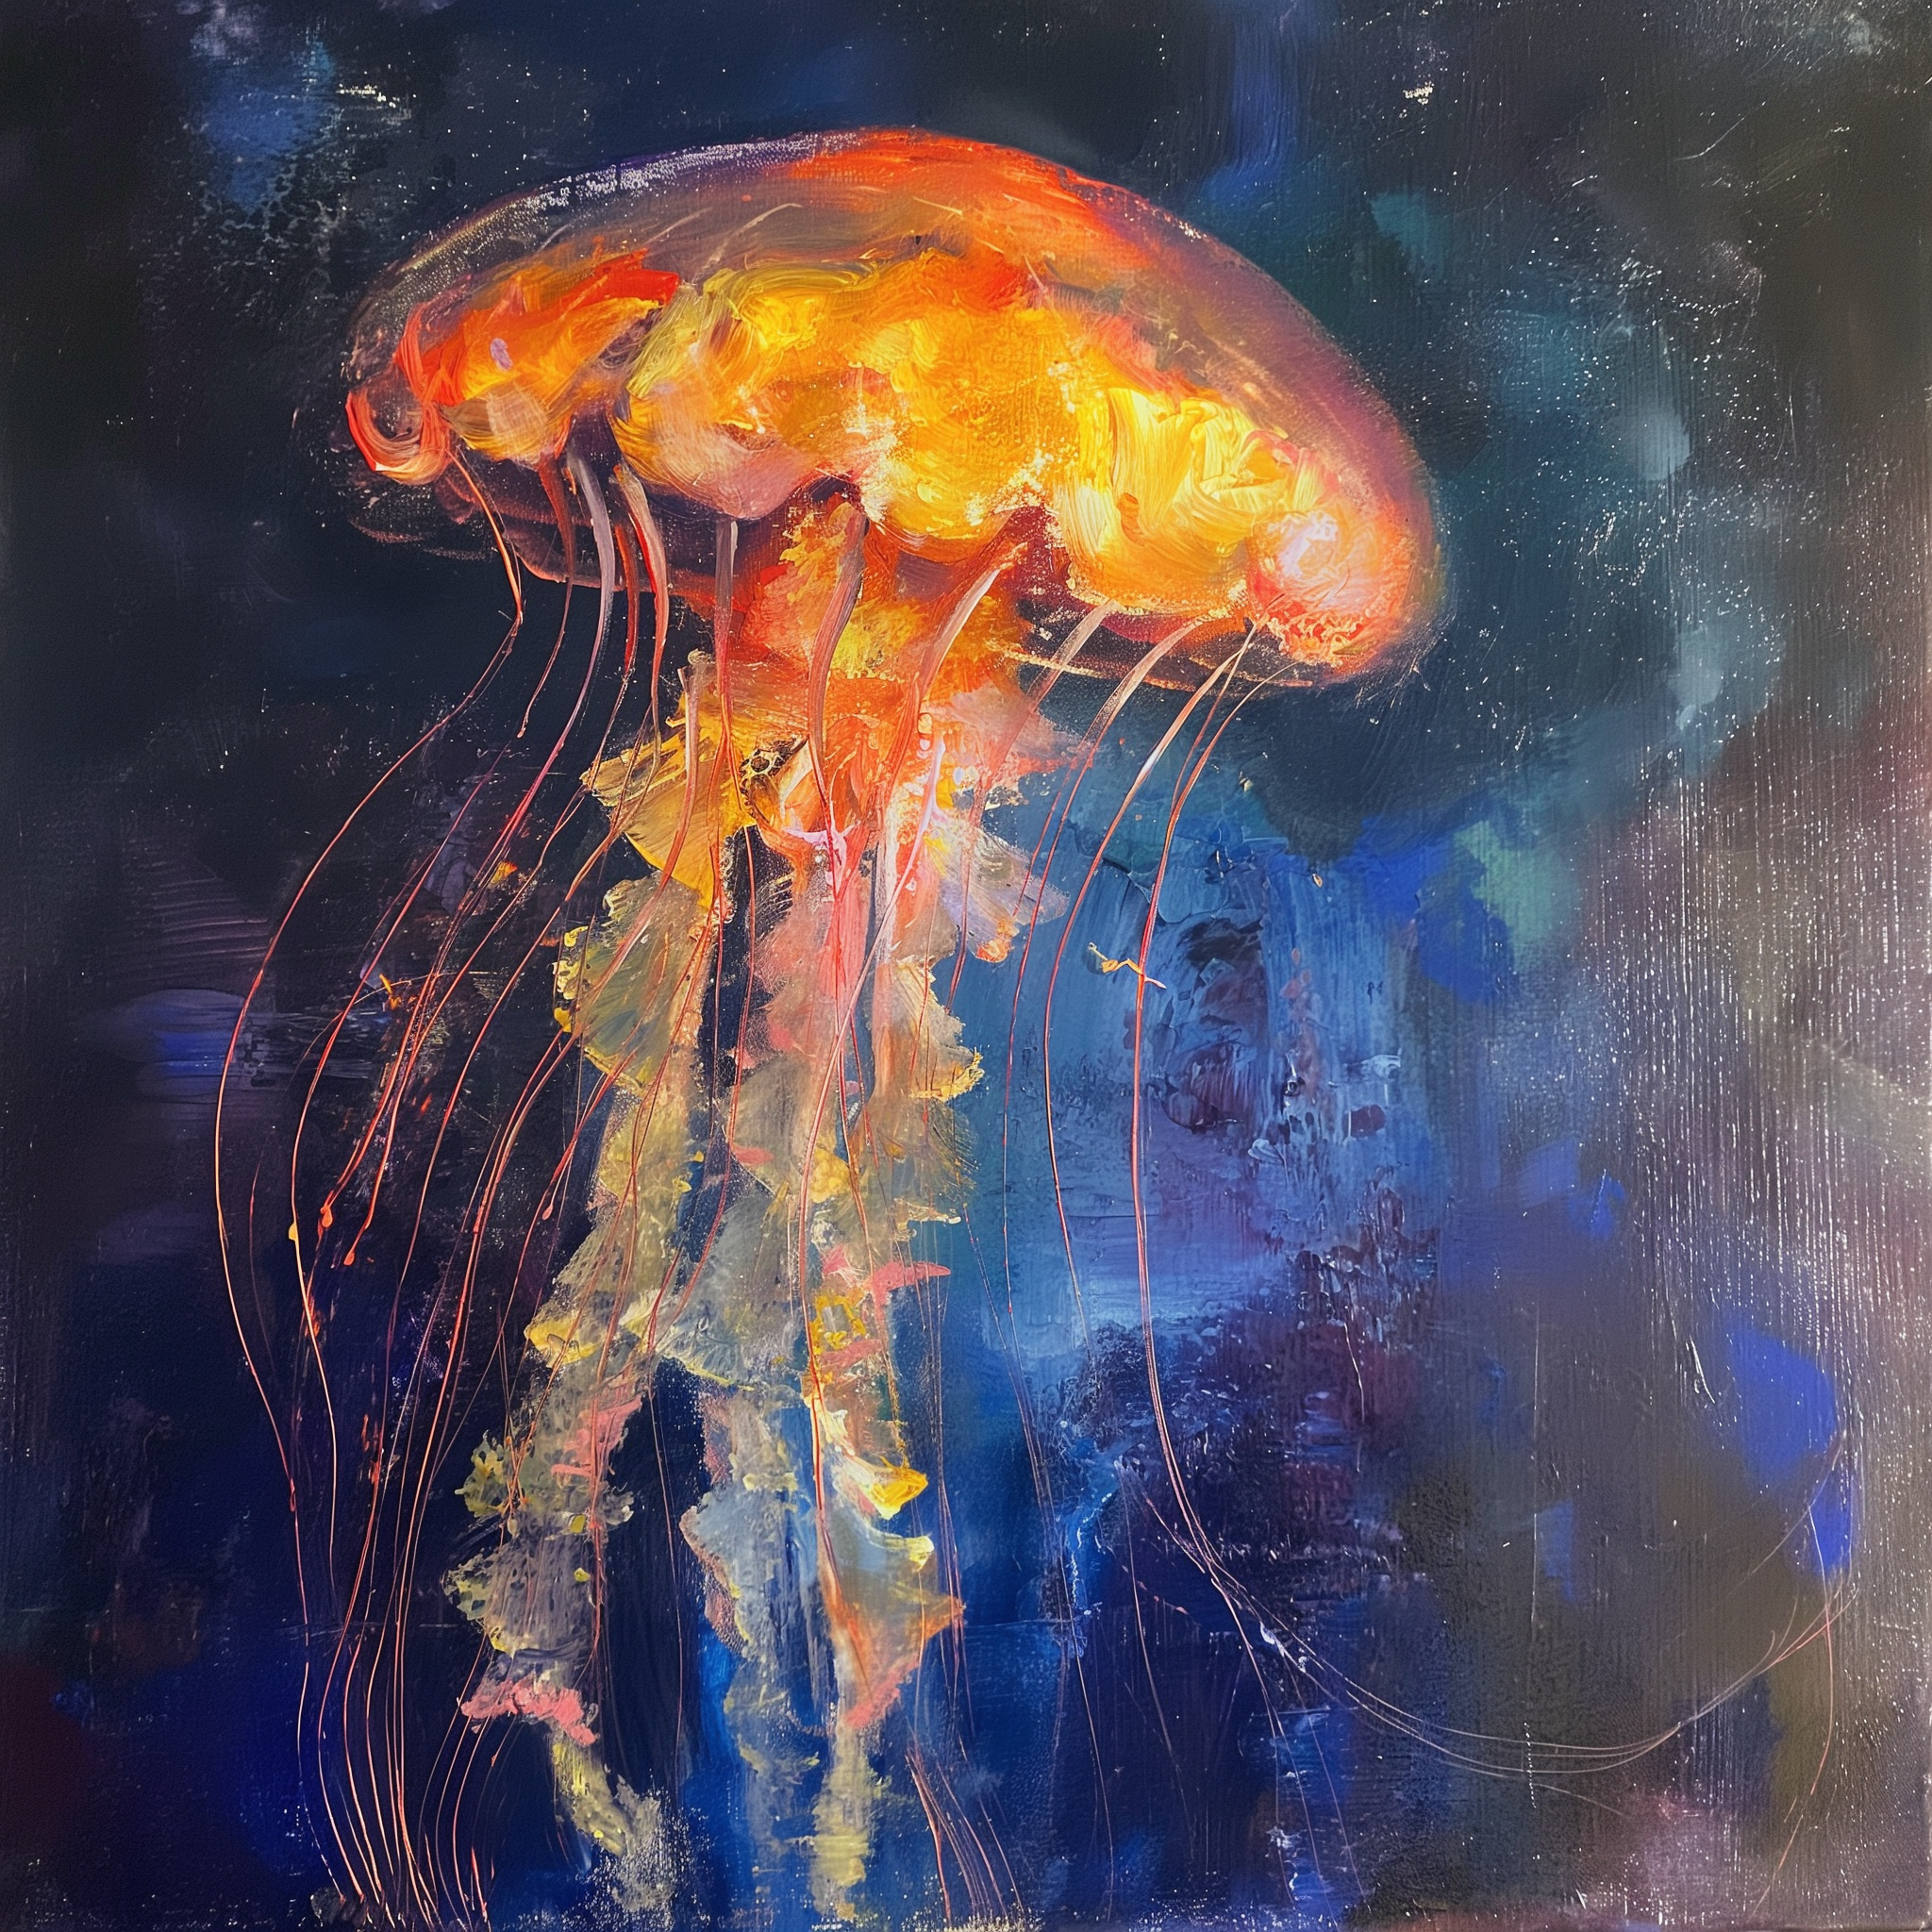 Colorful jellyfish painting on dark background, artistic avatar.